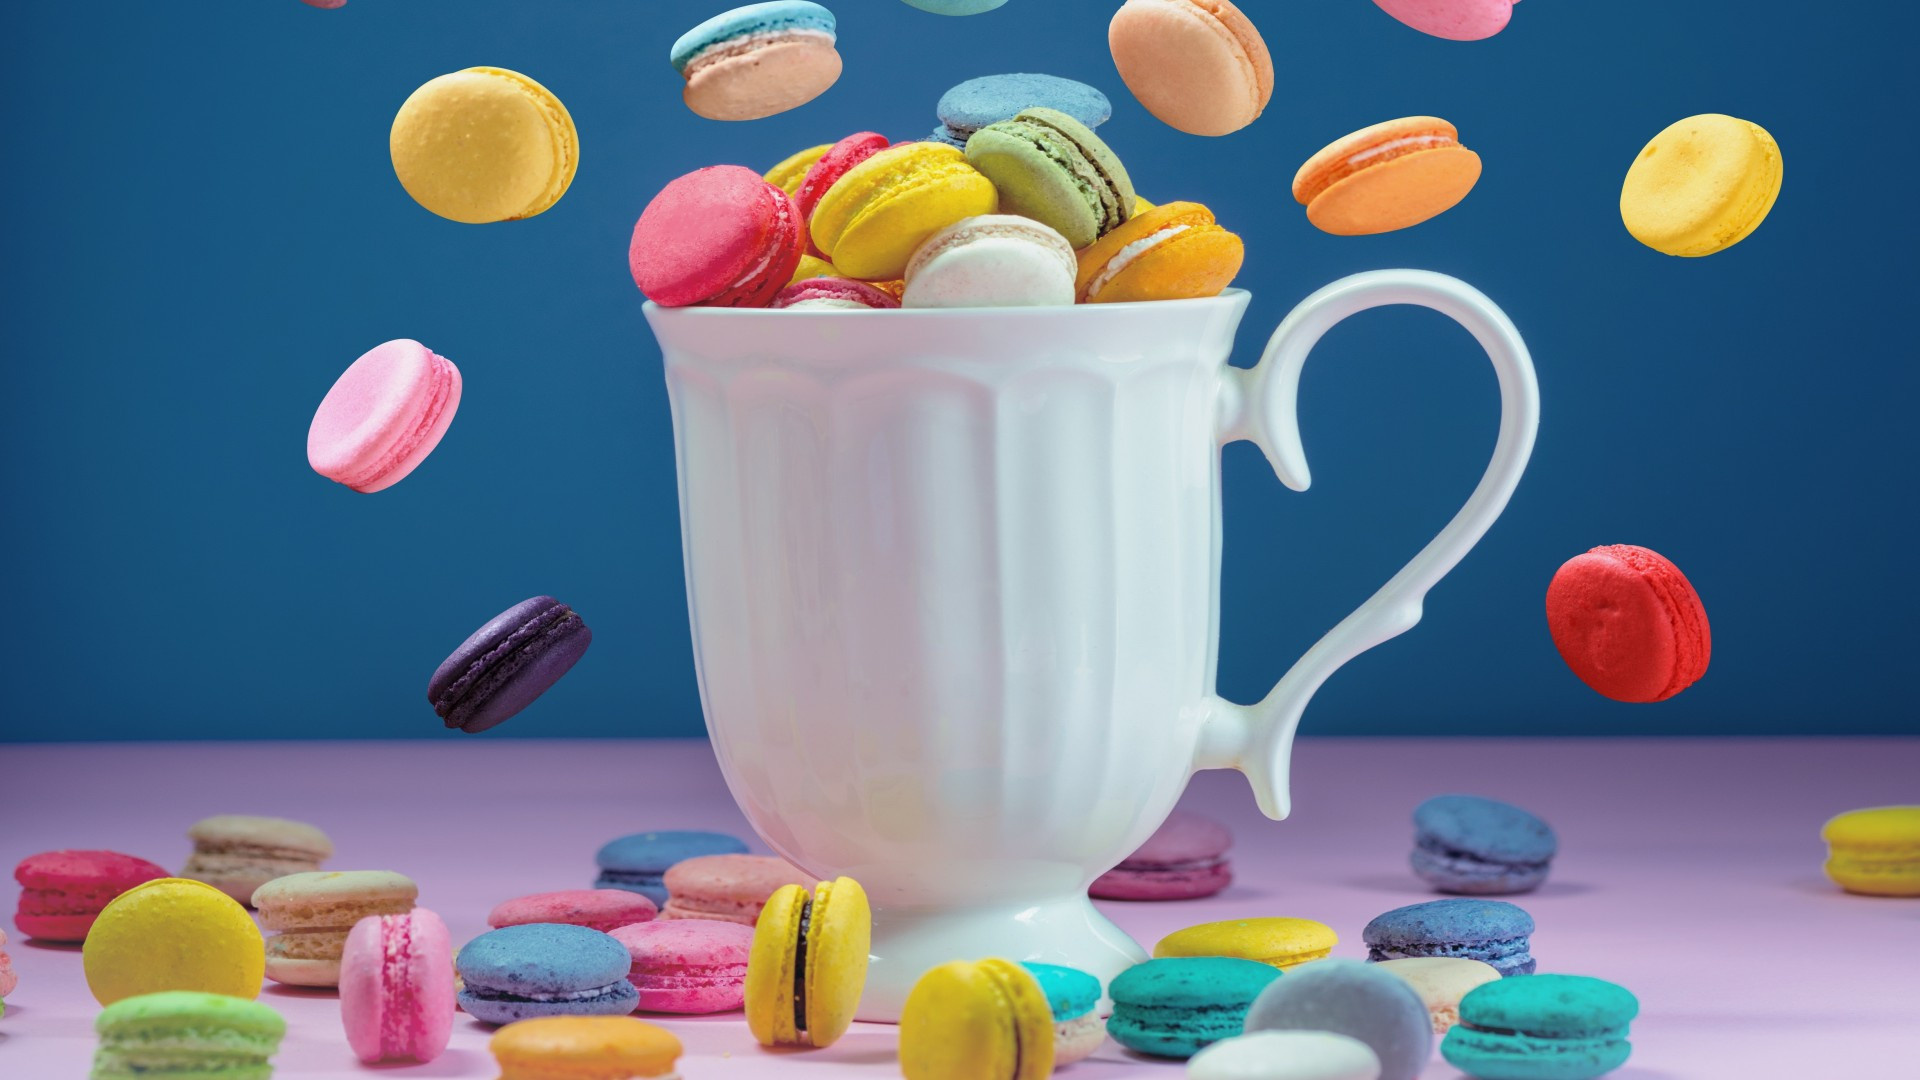 Macaron: A type of cookie that has become popular worldwide, Cup, Pastry, Sweets. 1920x1080 Full HD Background.